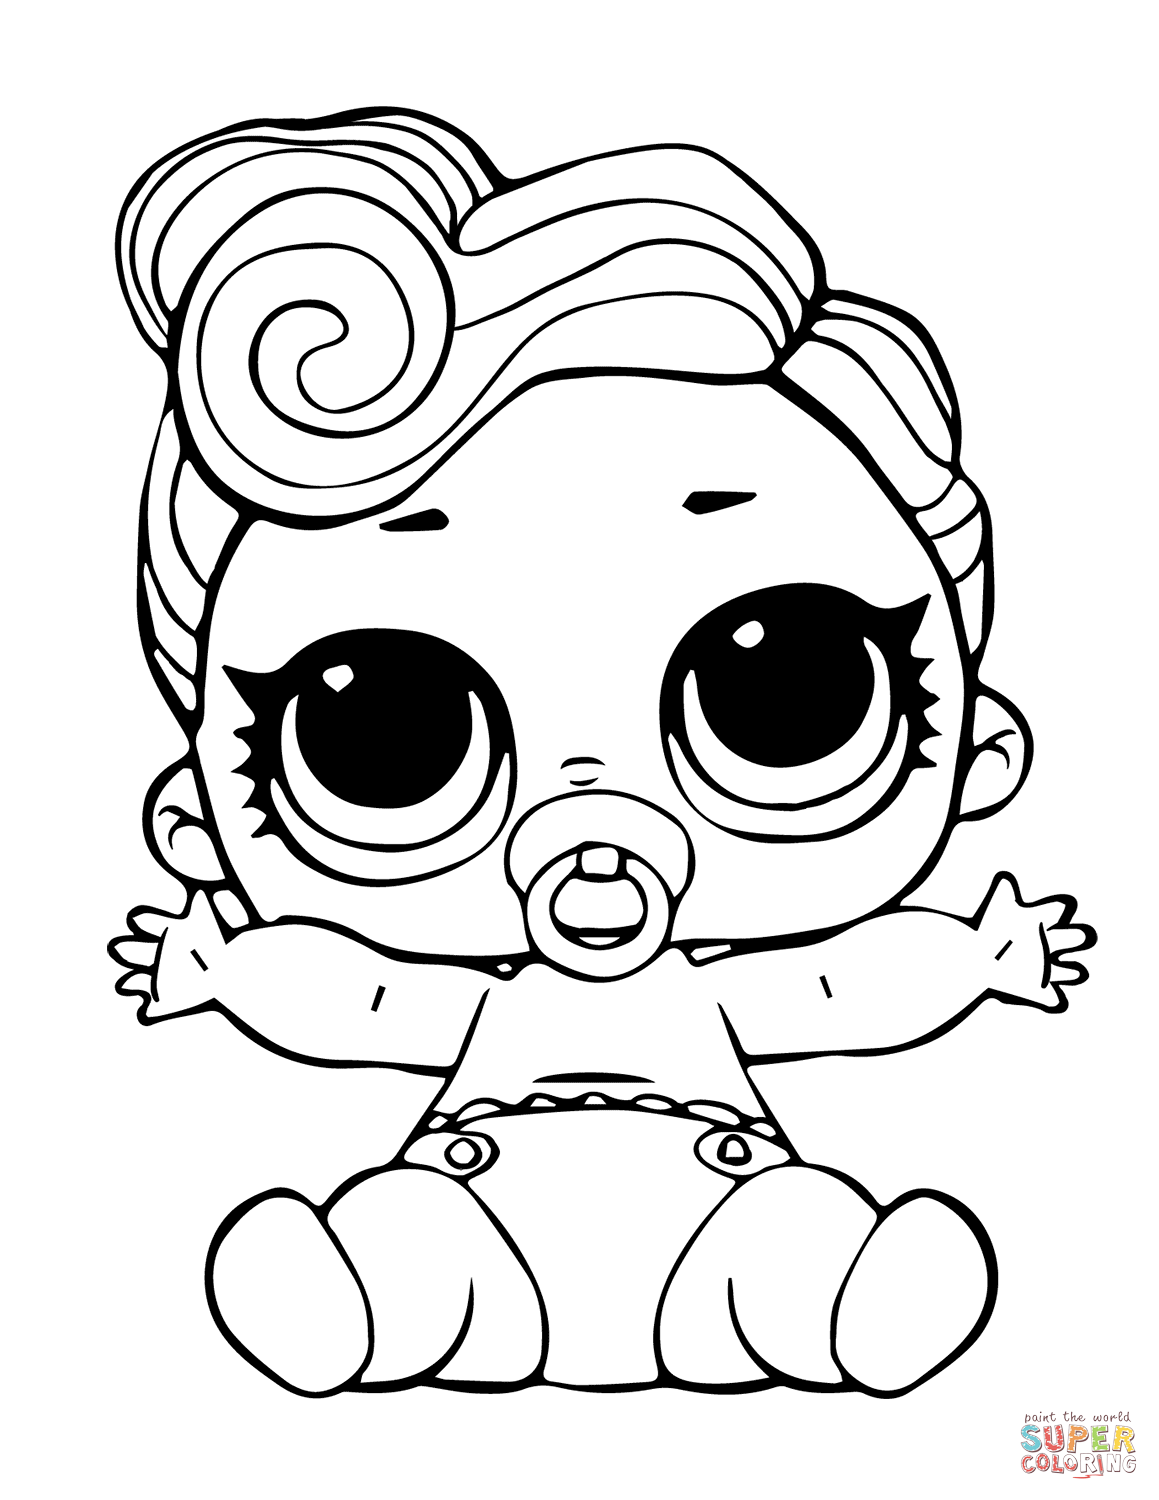 LOL Coloring Pages FREE Printable 13